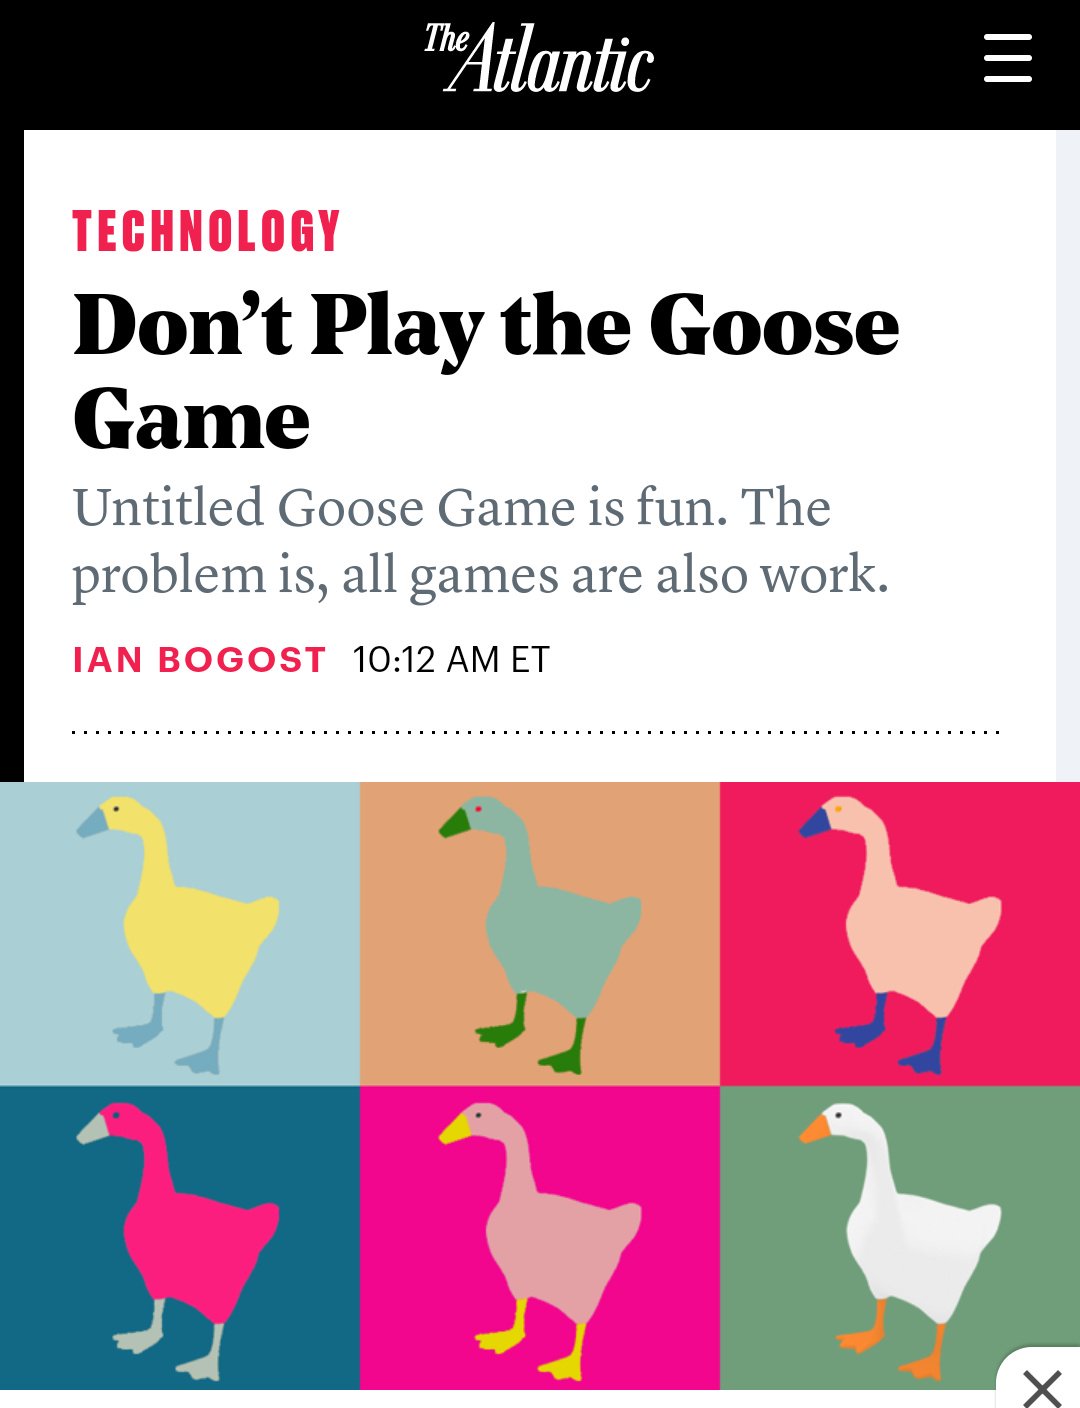 Don't Play Untitled Goose Game - The Atlantic